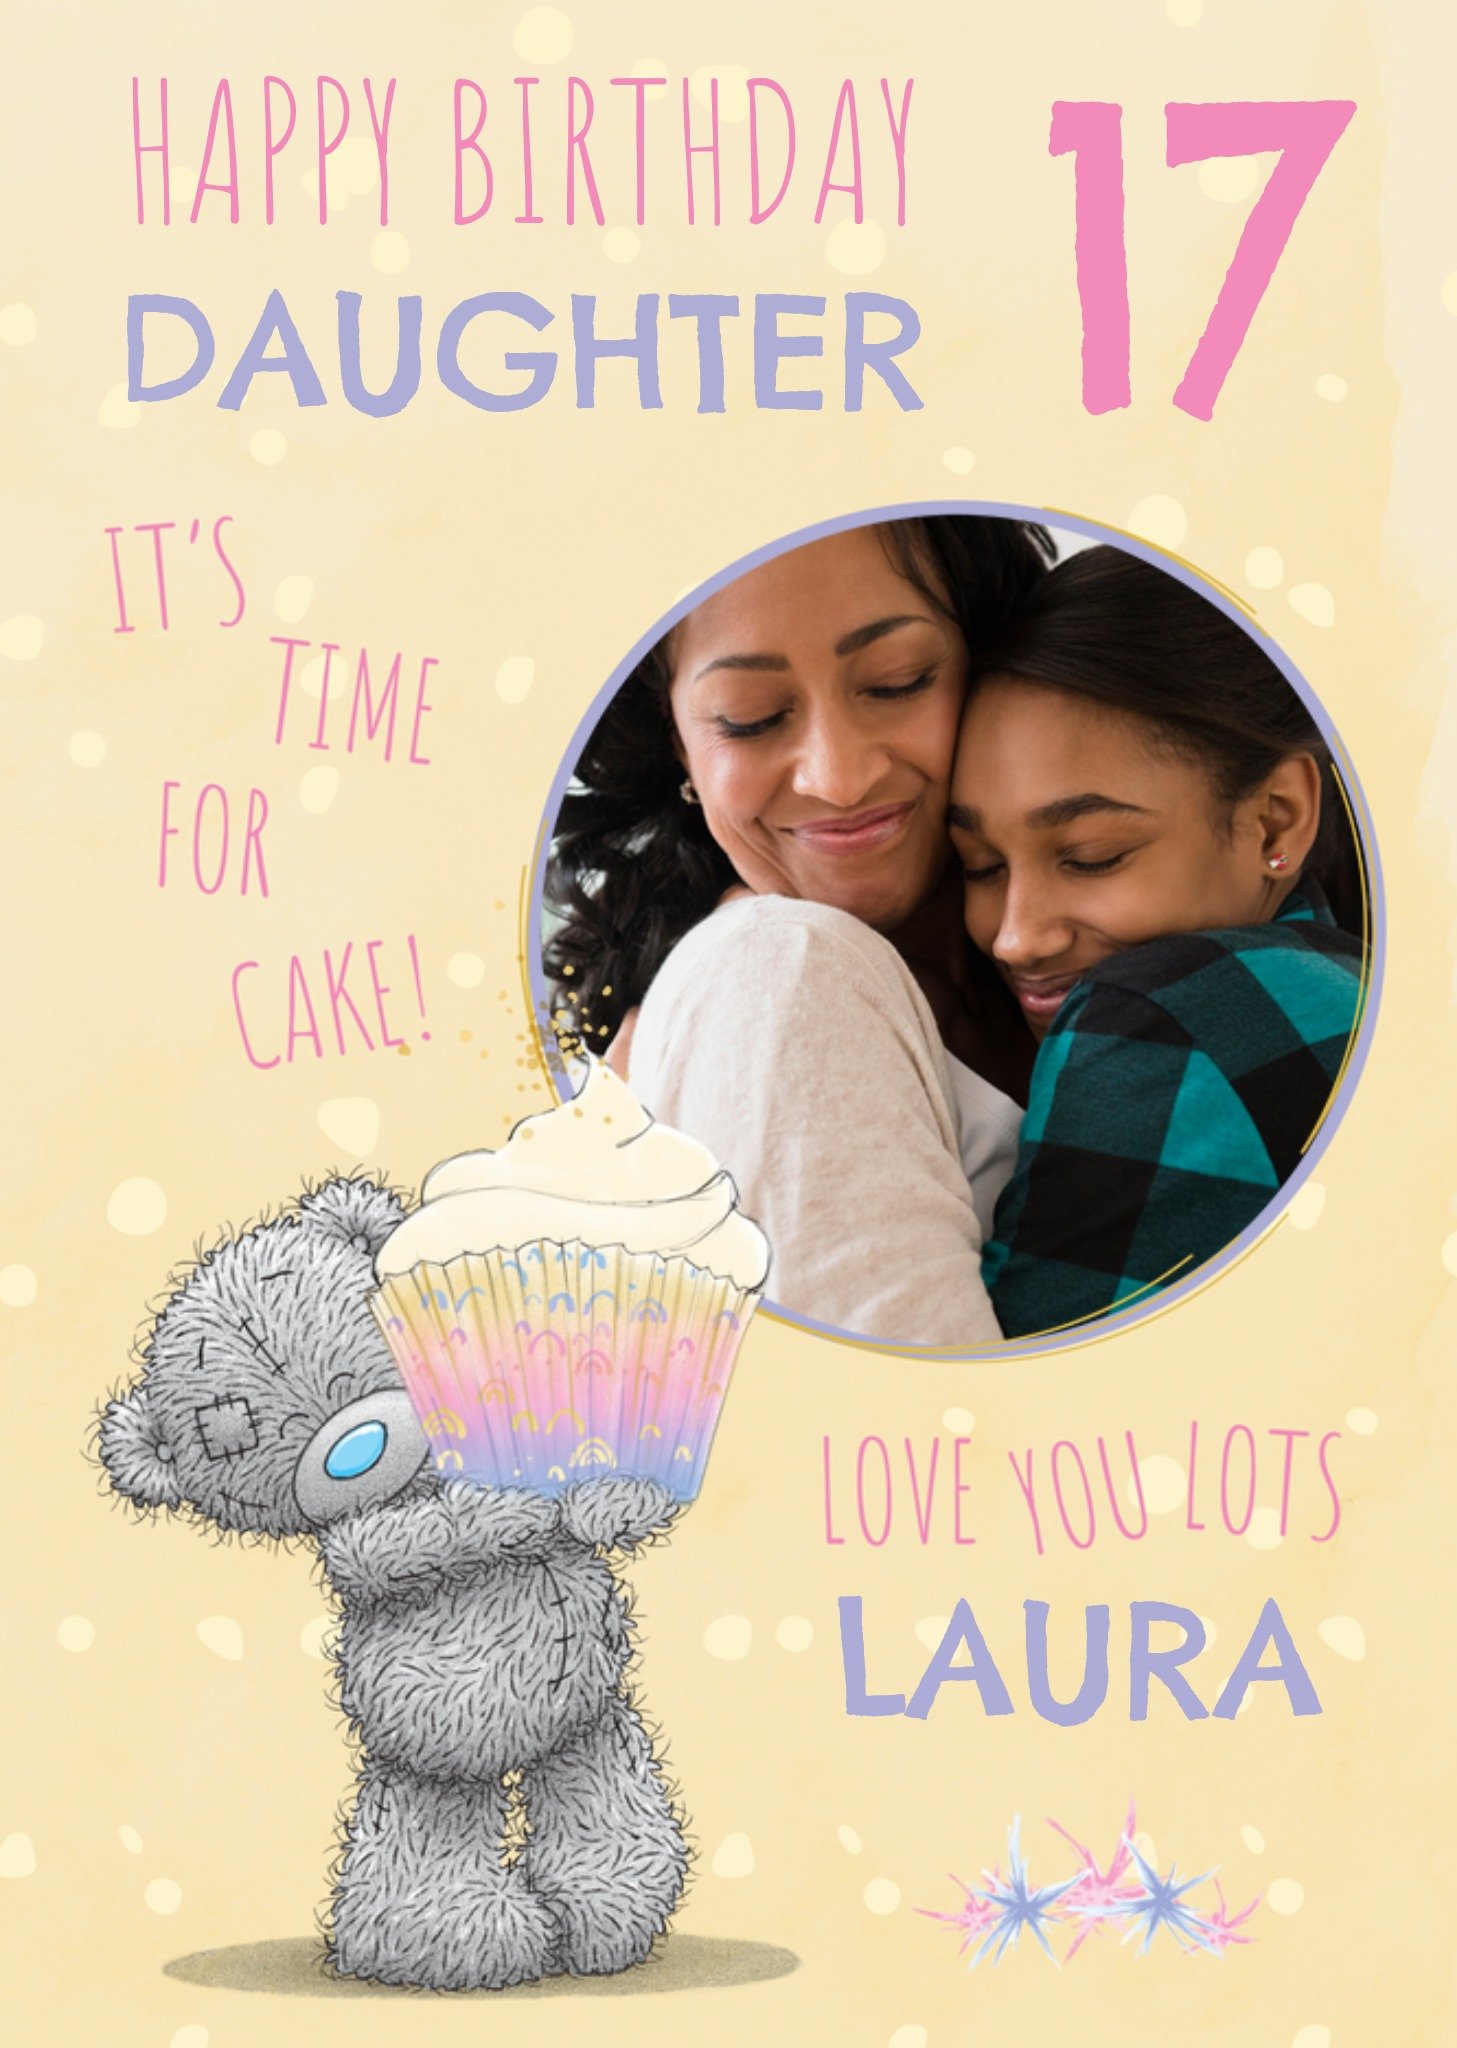 Me To You Tatty Teddy It's Time For Cake Photo Upload Birthday Card, Large